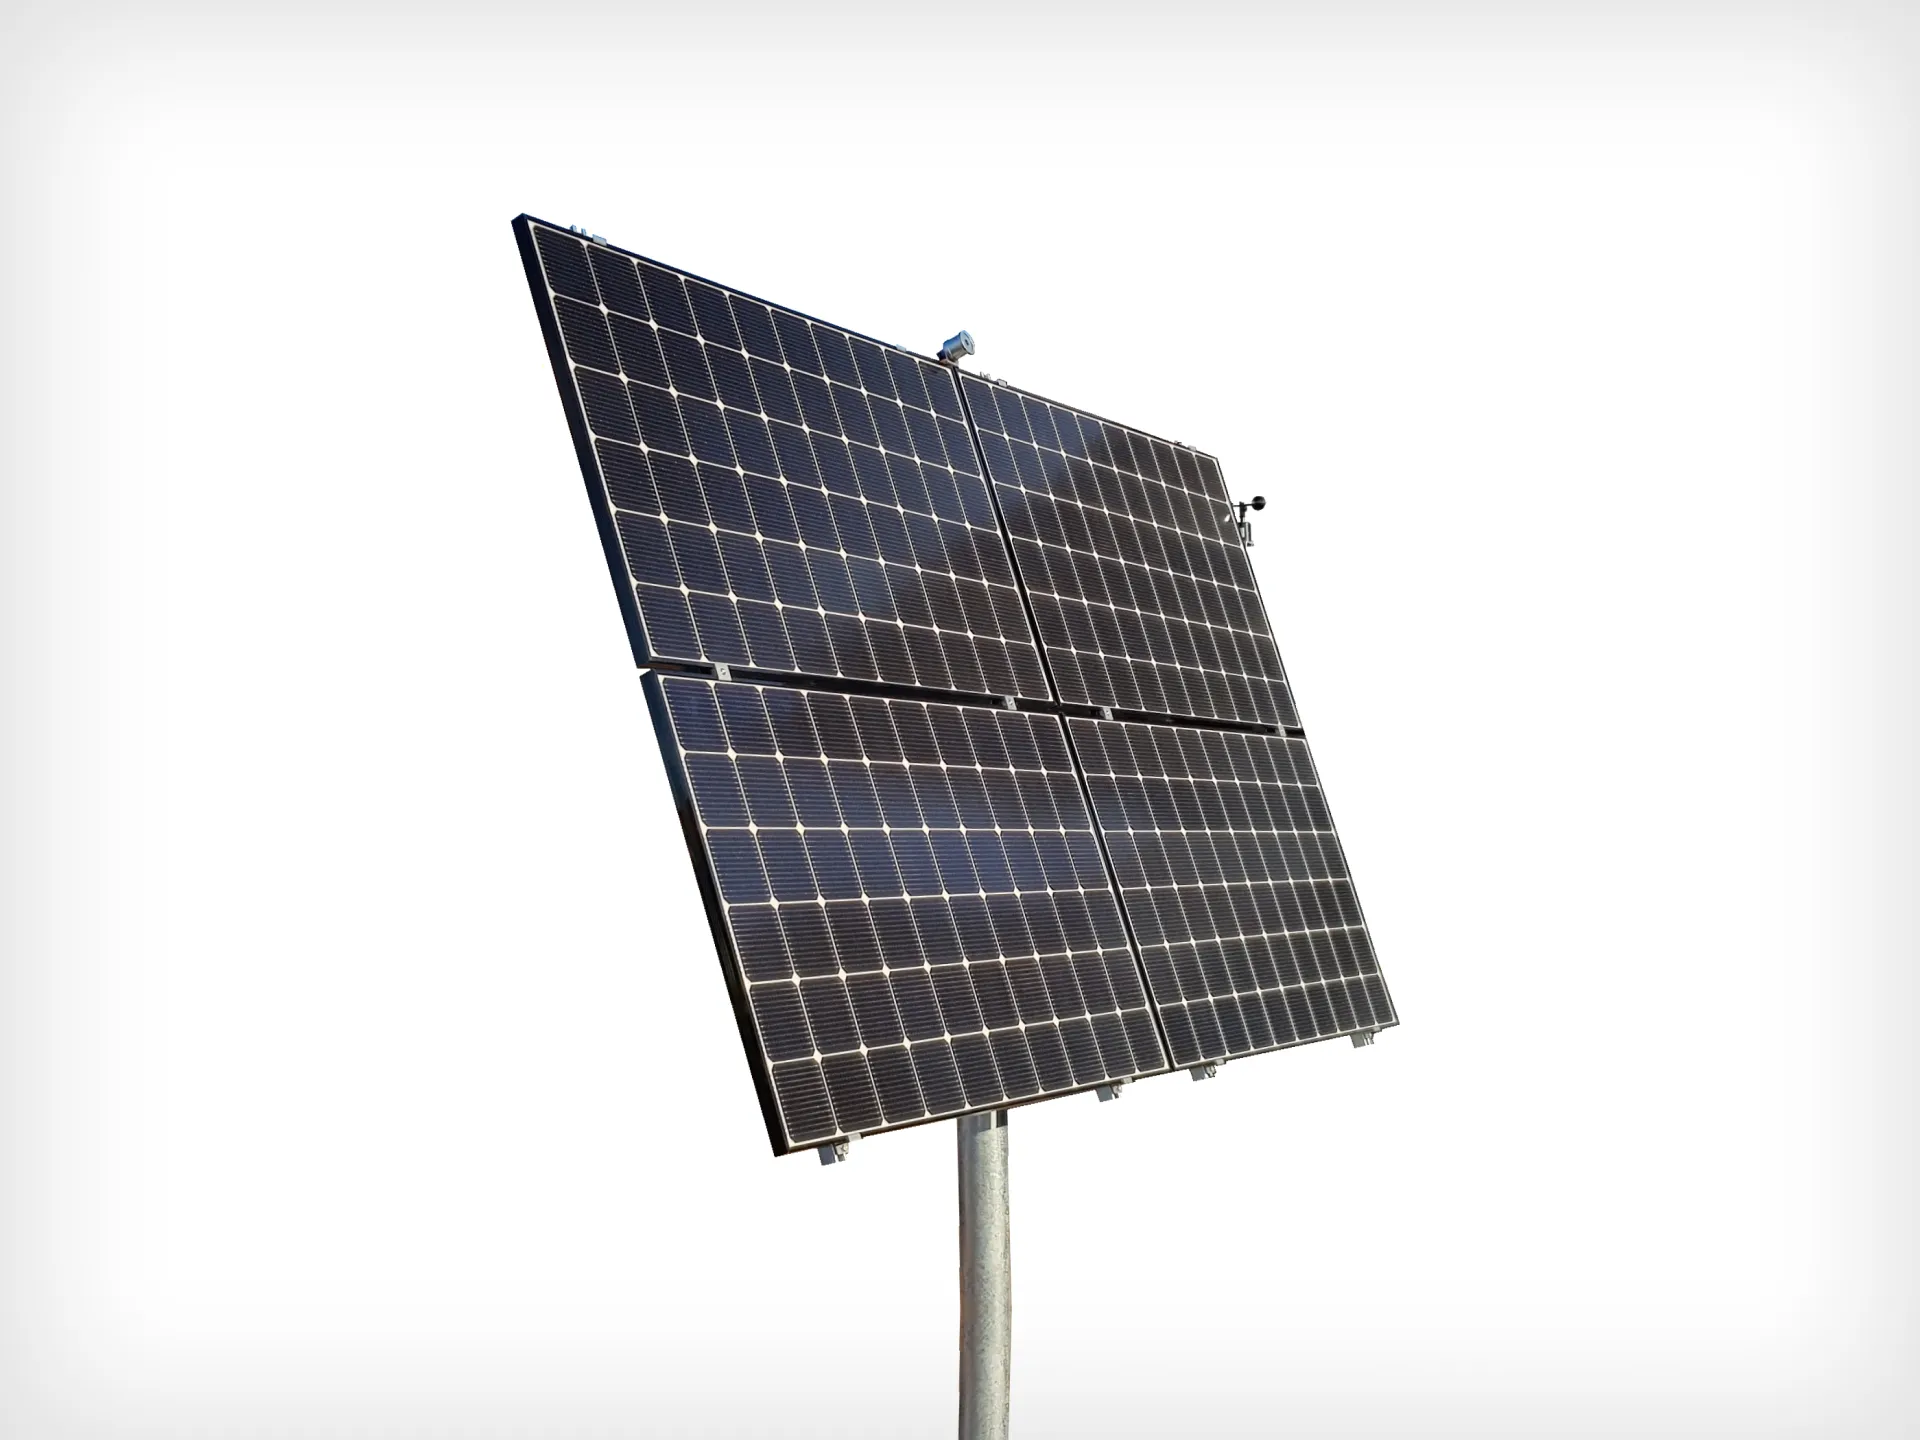 A photo of a solar panel.